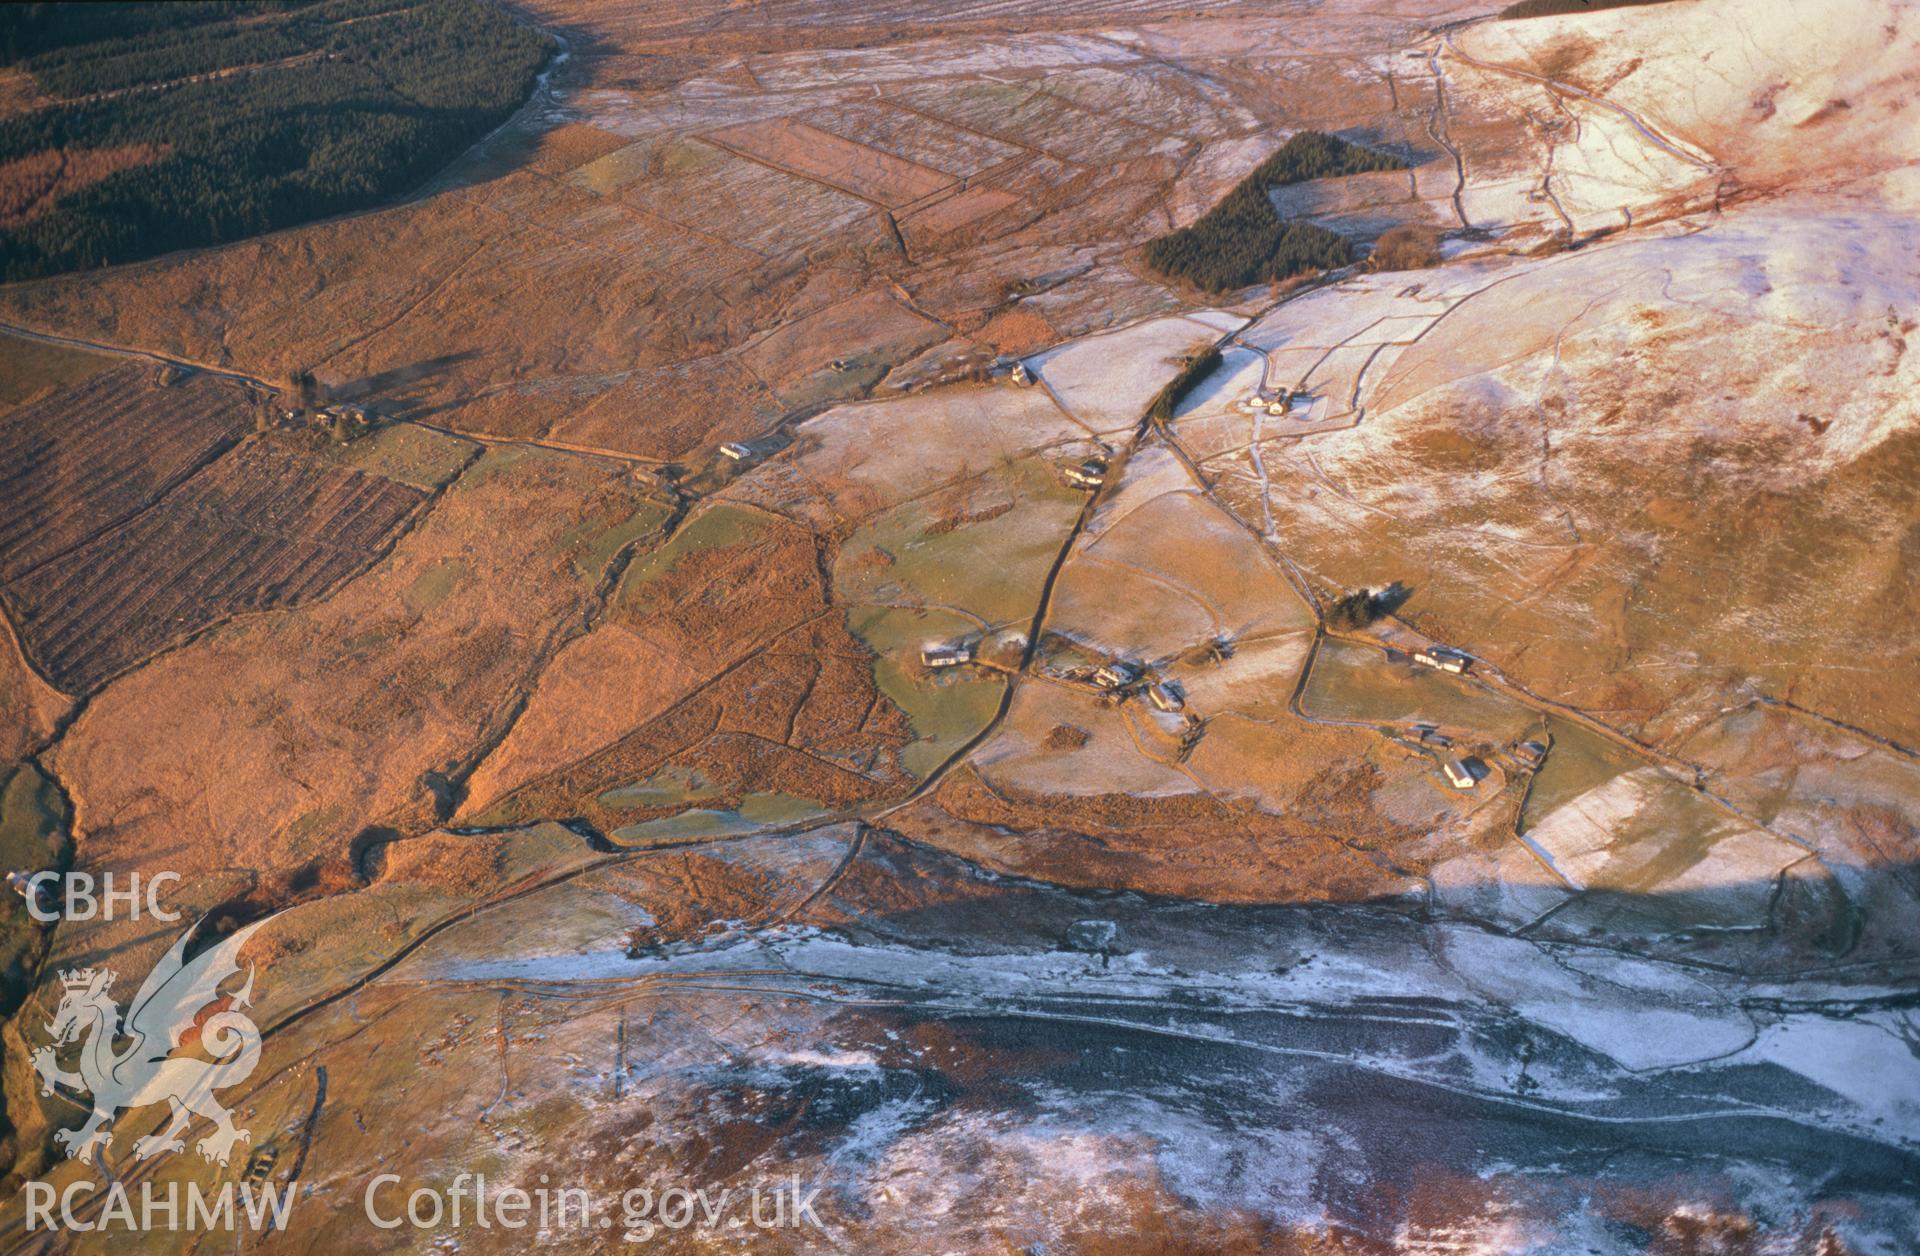 RCAHMW colour slide oblique aerial photograph of a squatter settlement bnetween Lluest and Tanlan-fawr, Pontarfynach, taken on 11/01/1999 by Toby Driver